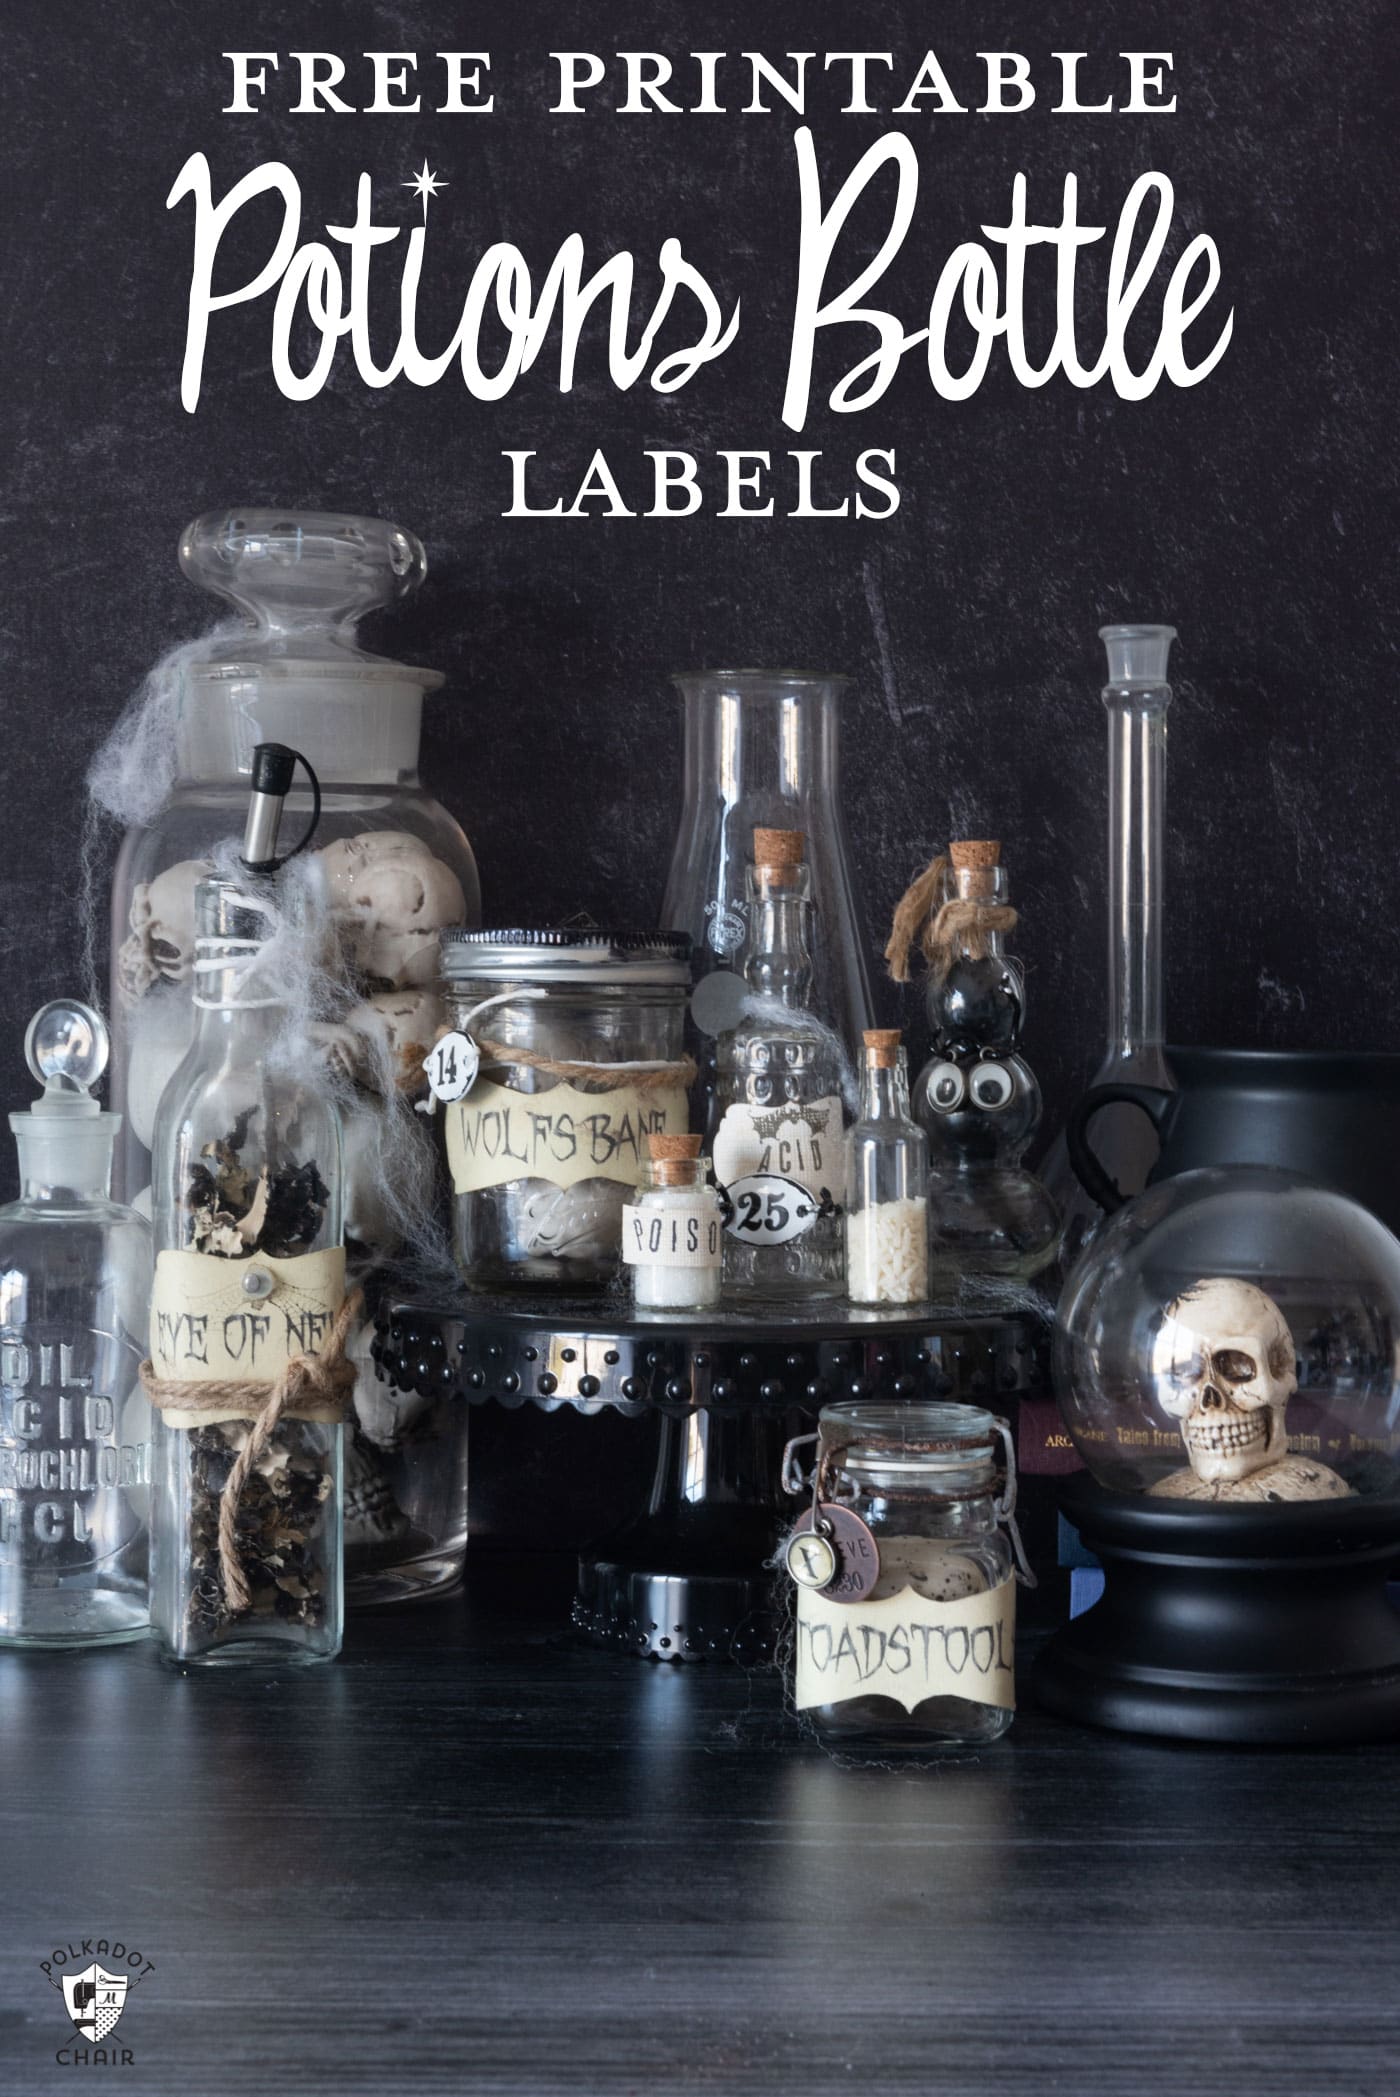 glass potions bottles on black table